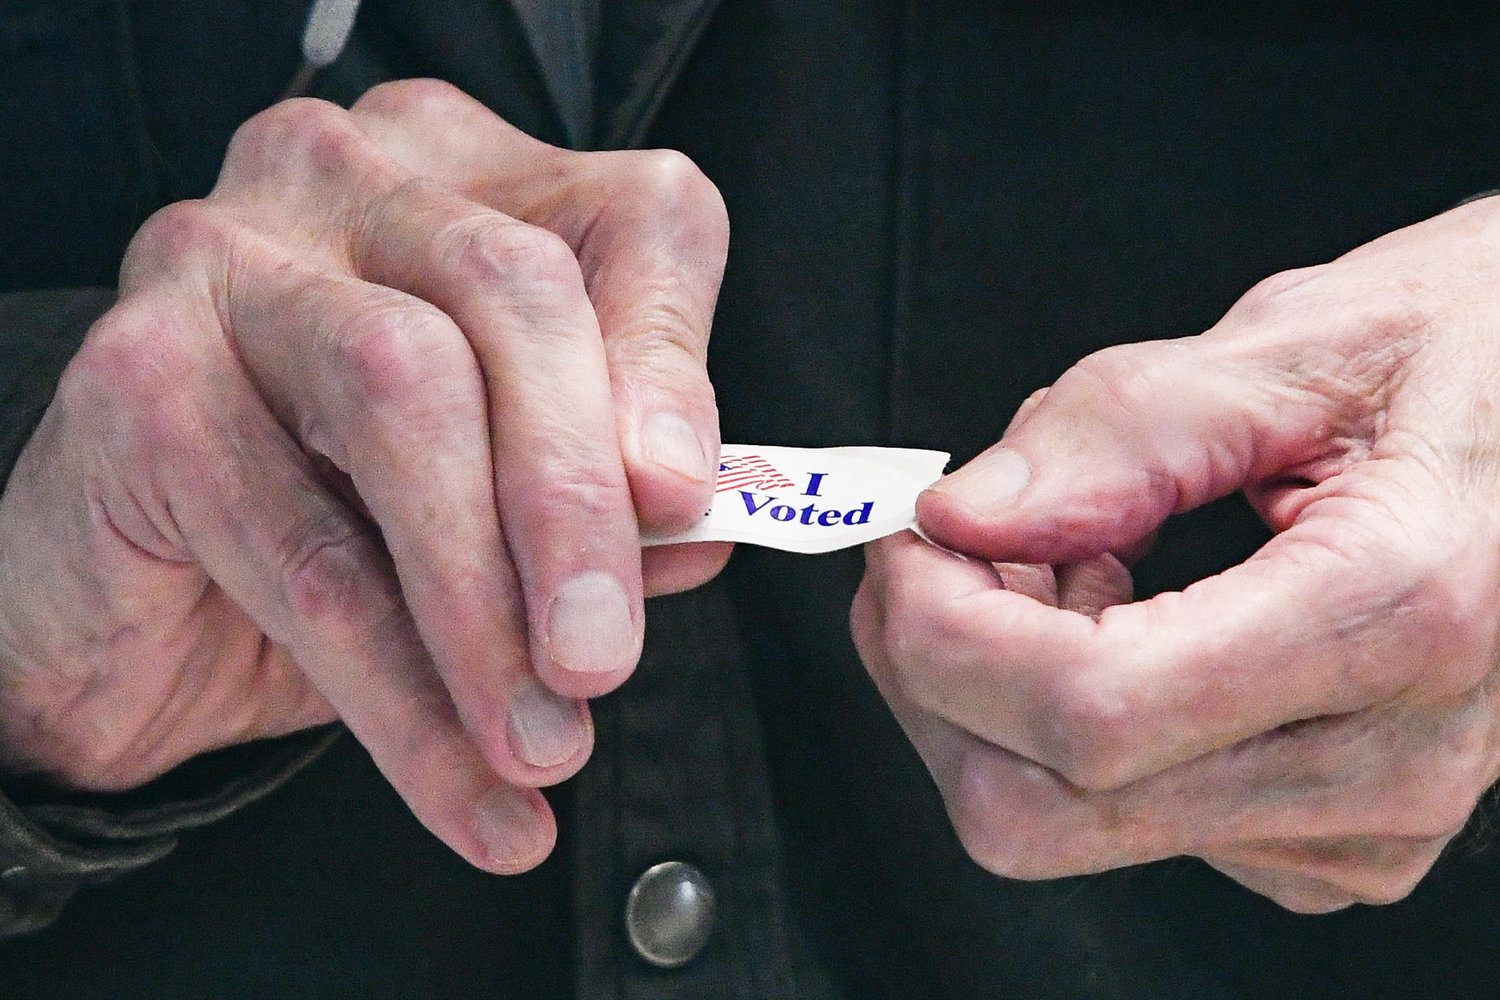 A man prepares to put on an "I Voted" sticker after casting hil ballot at Utica City Hall on Tuesday, Nov. 8. Oneida County election commissioners reported a busy day at the polls, with some 4,500 to 4,700 voters each hour going to cast their ballots across the county.